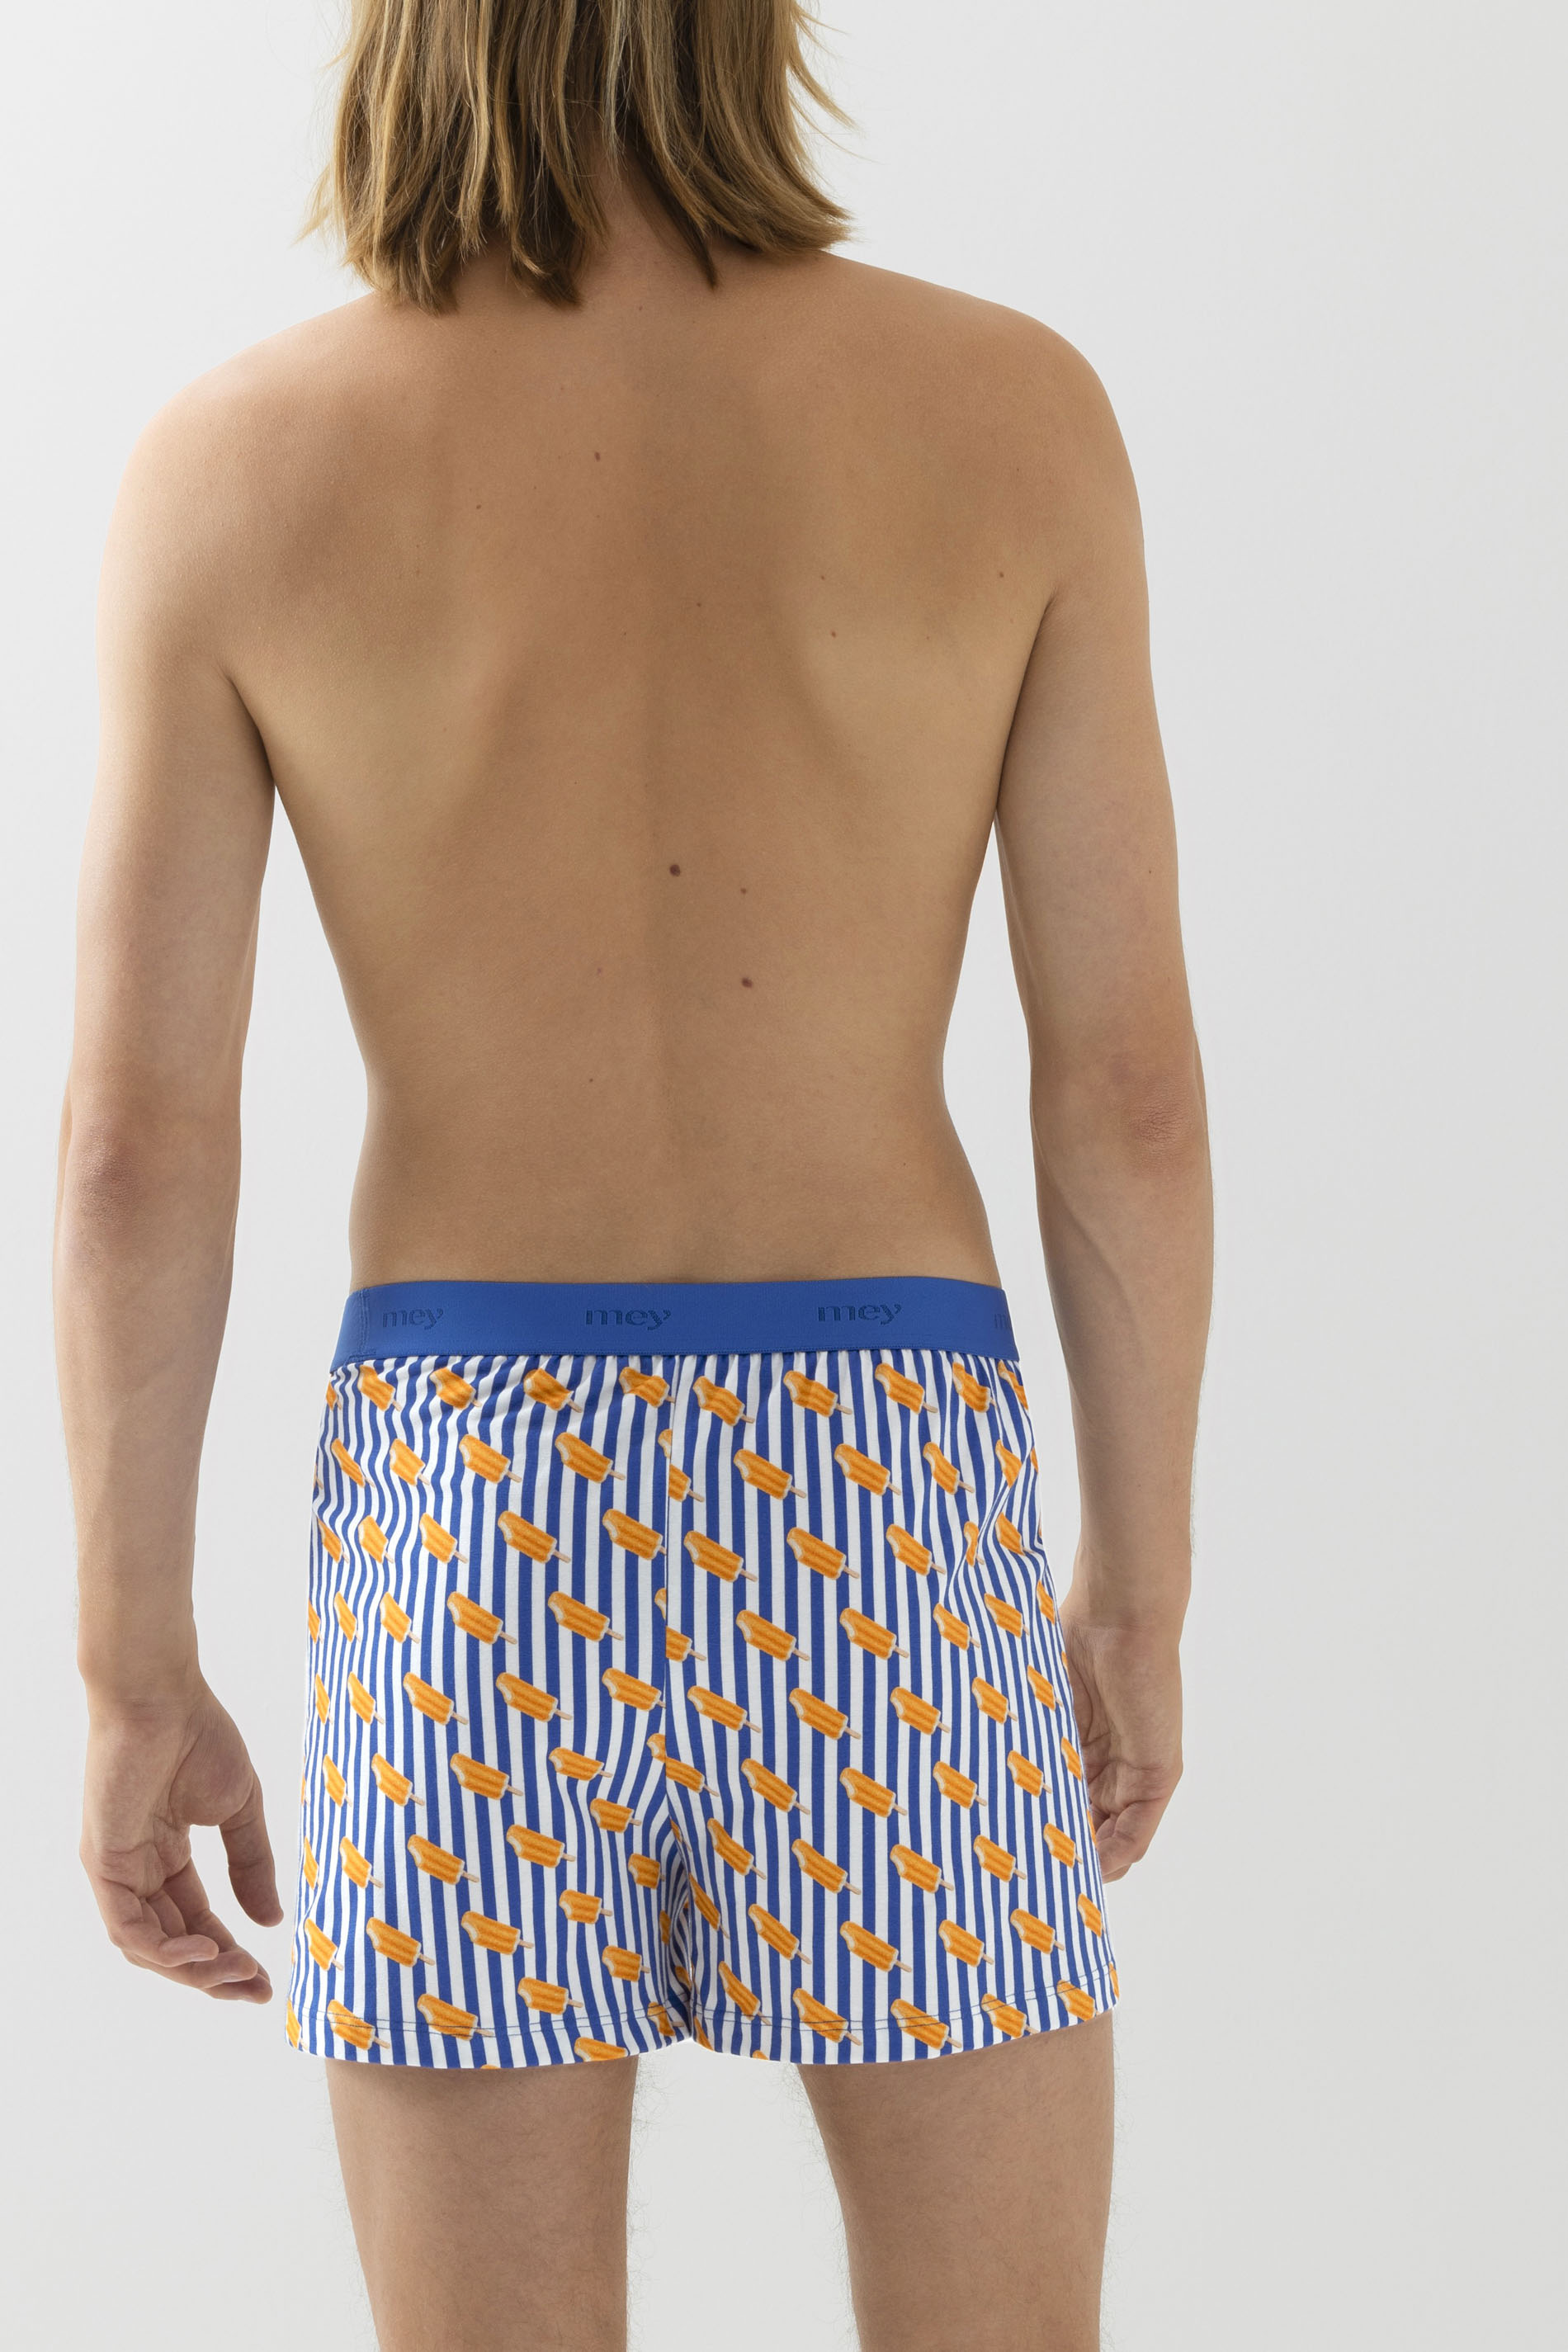 Boxer shorts Serie RE:THINK ICE Rear View | mey®